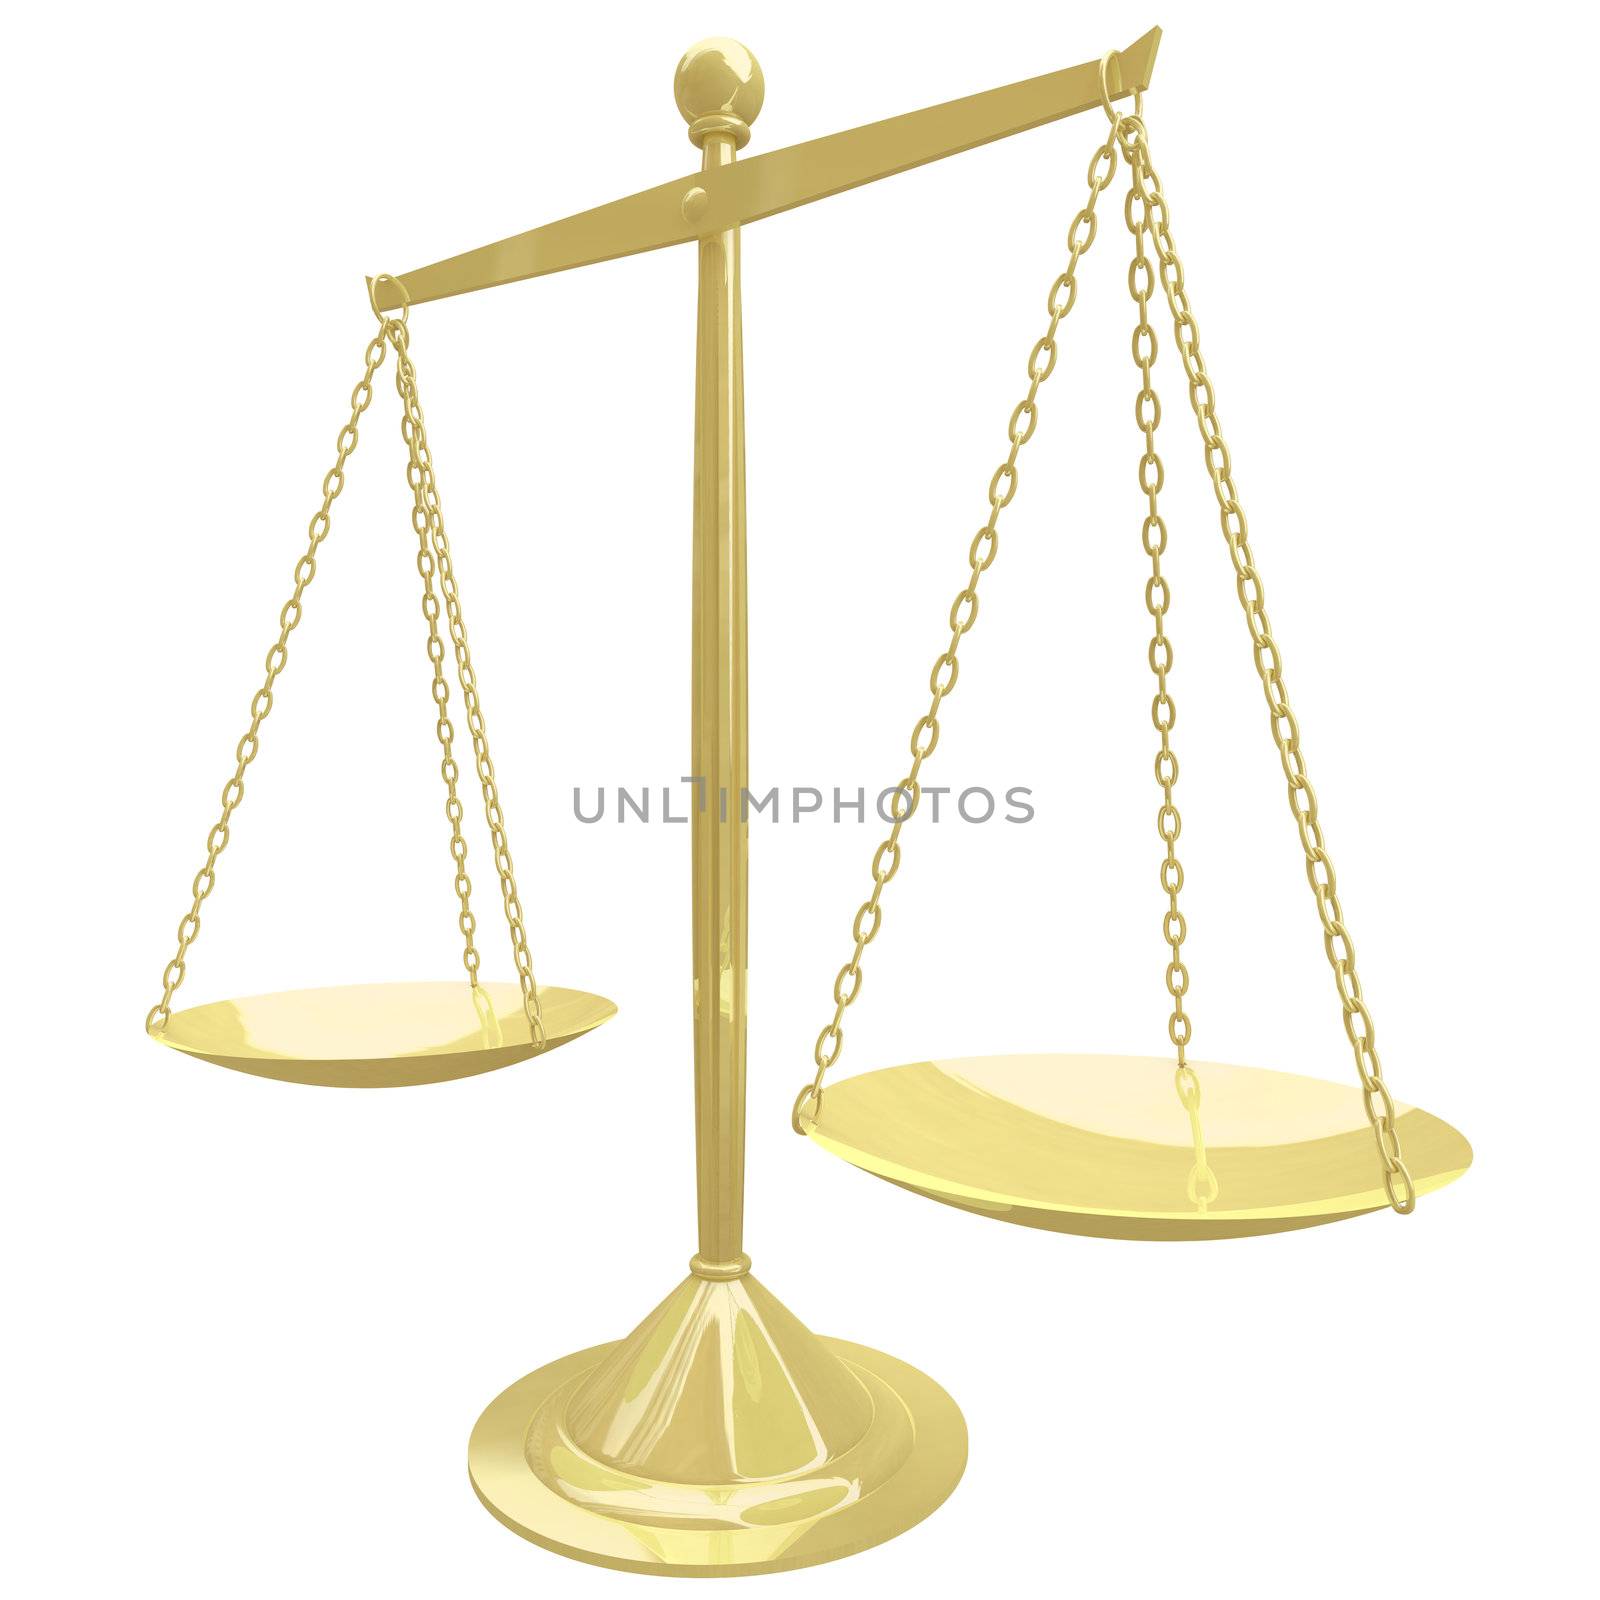 A gold scale with both sides in perfect balance